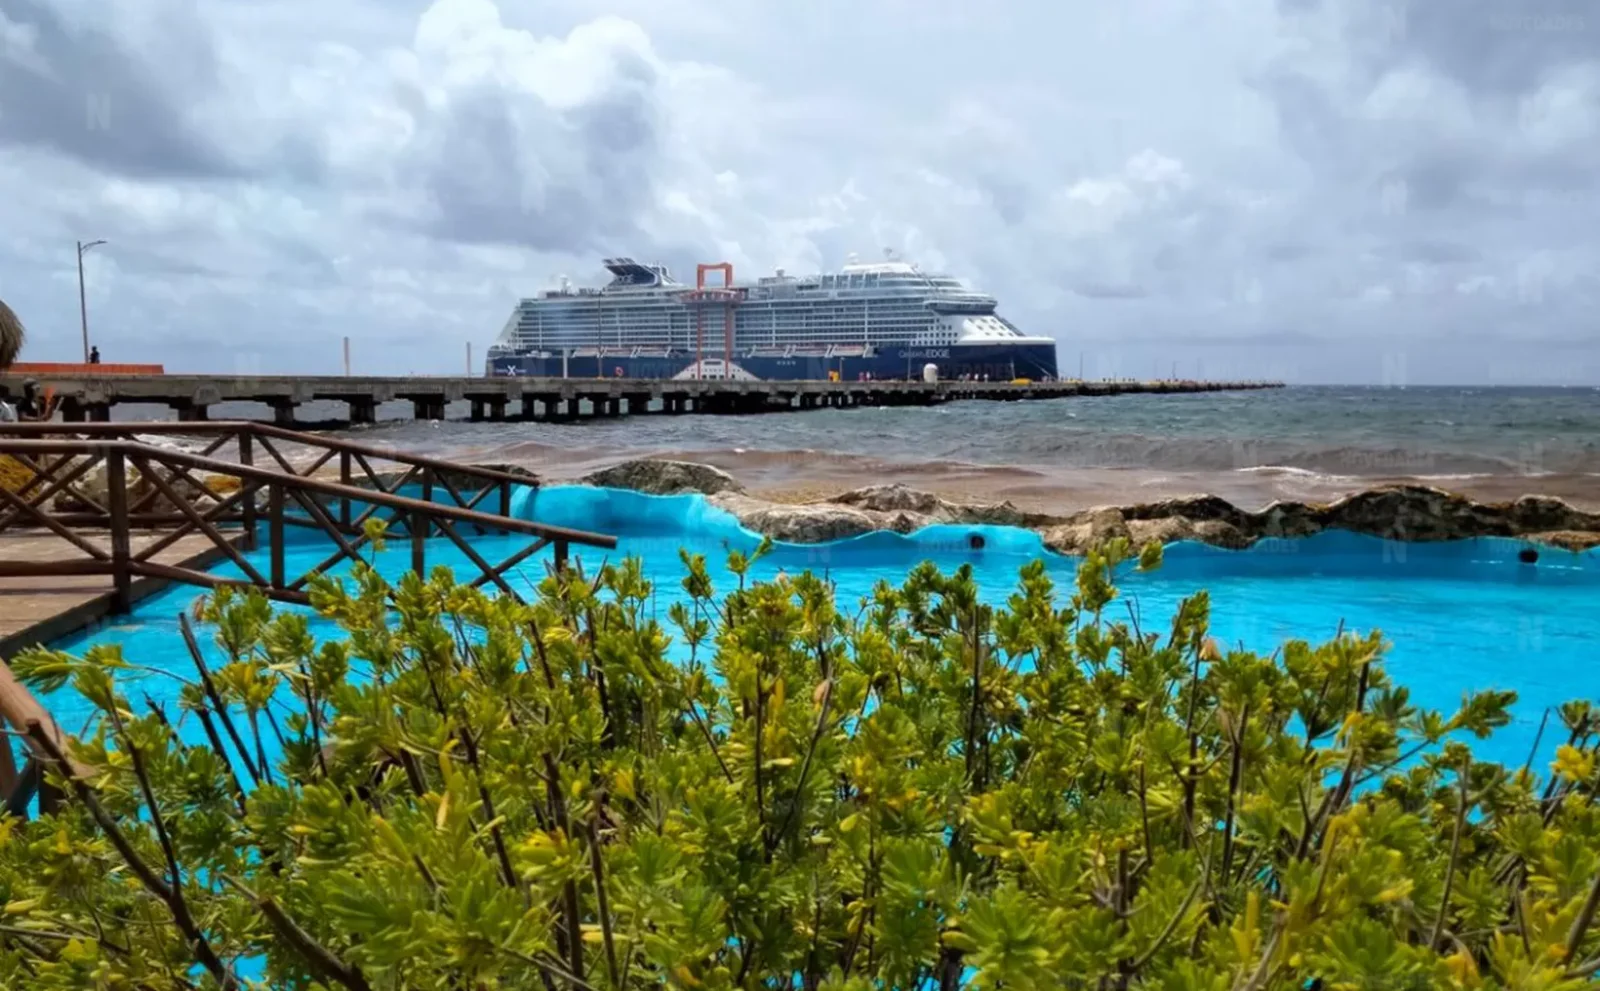 A cruise ship docked at a pier in a tropical location with choppy sea water and green foliage in the foreground under a cloudy sky.